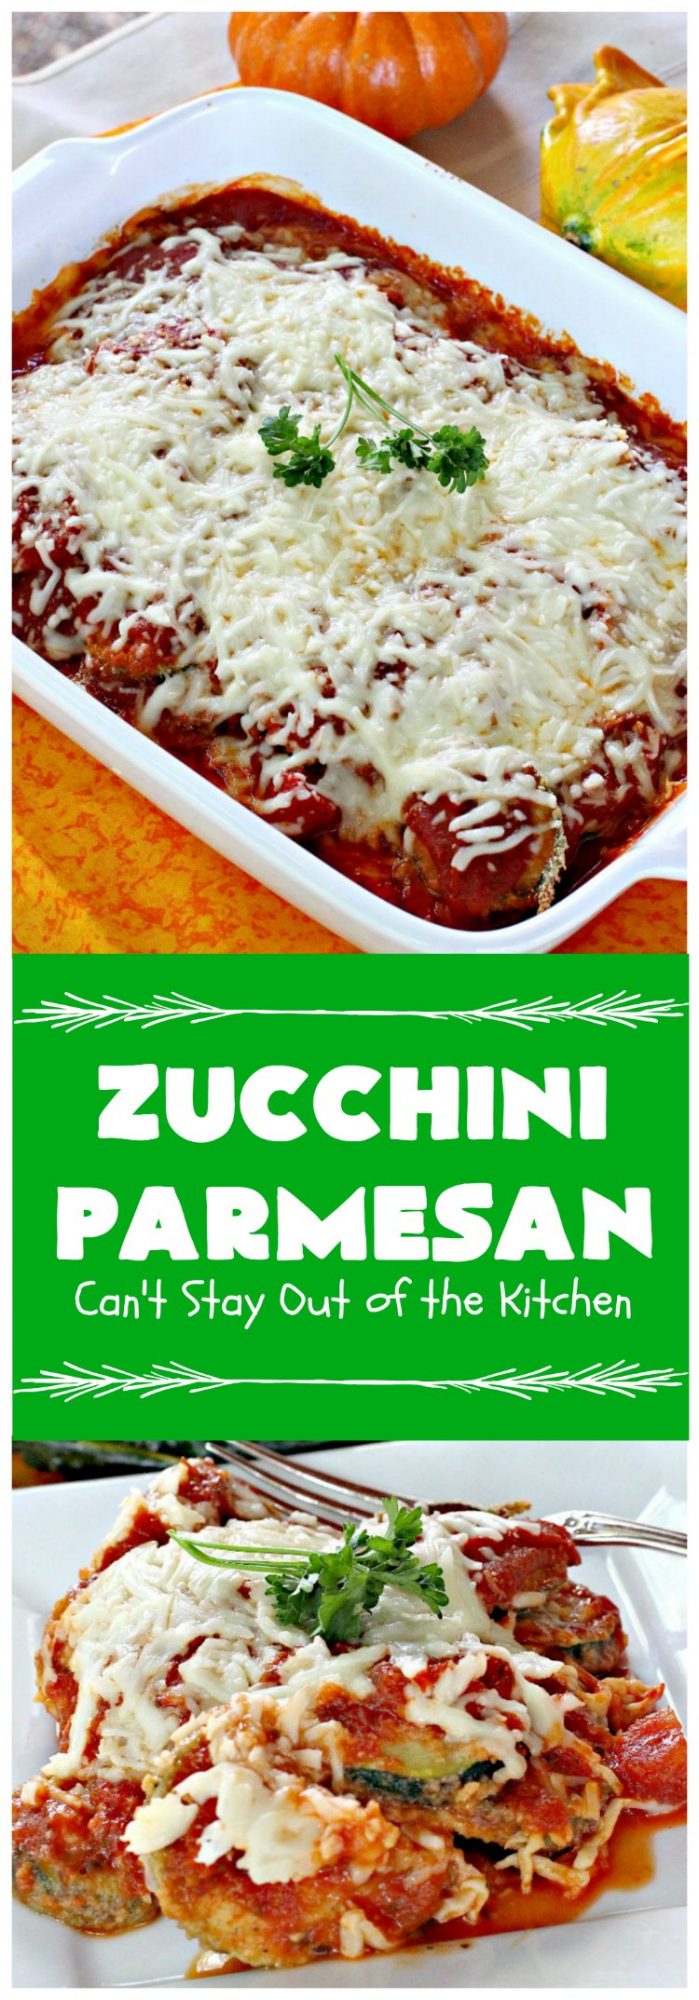 Zucchini Parmesan – Can't Stay Out of the Kitchen